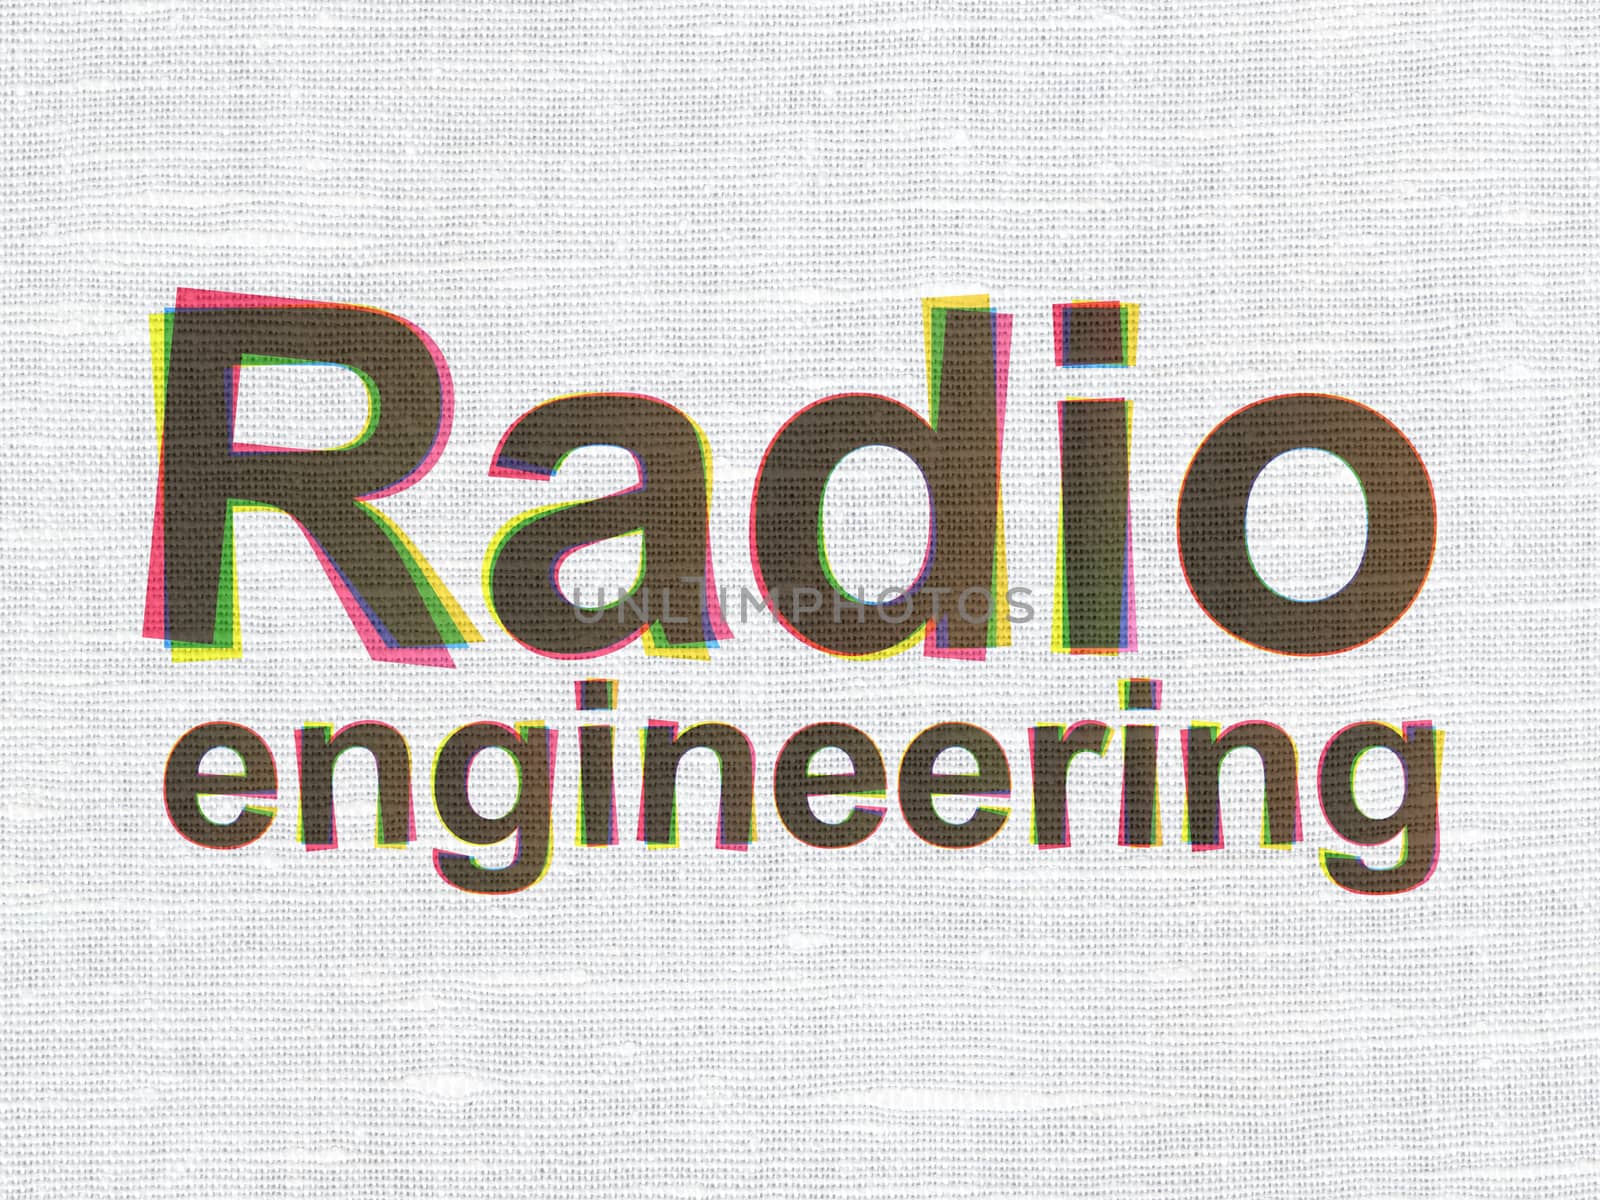 Science concept: CMYK Radio Engineering on linen fabric texture background